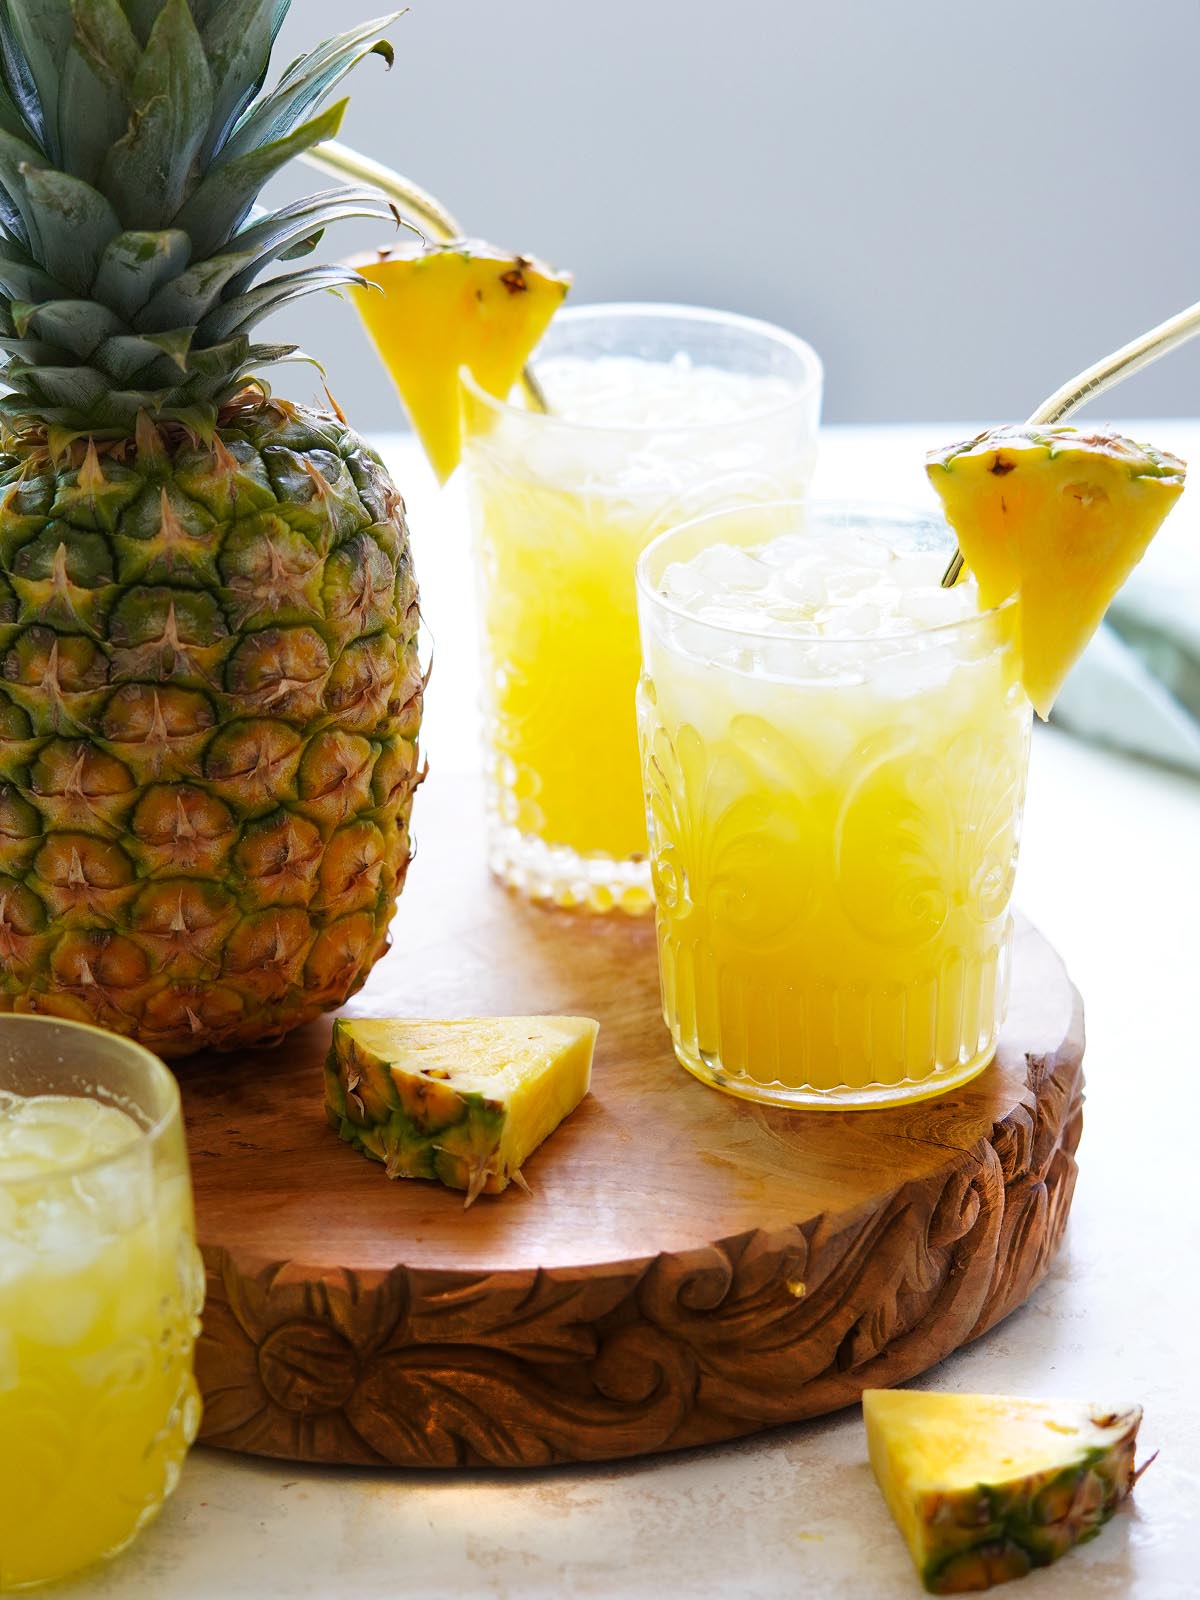 3 cups with pineapple water with a whole pineapple on the side.